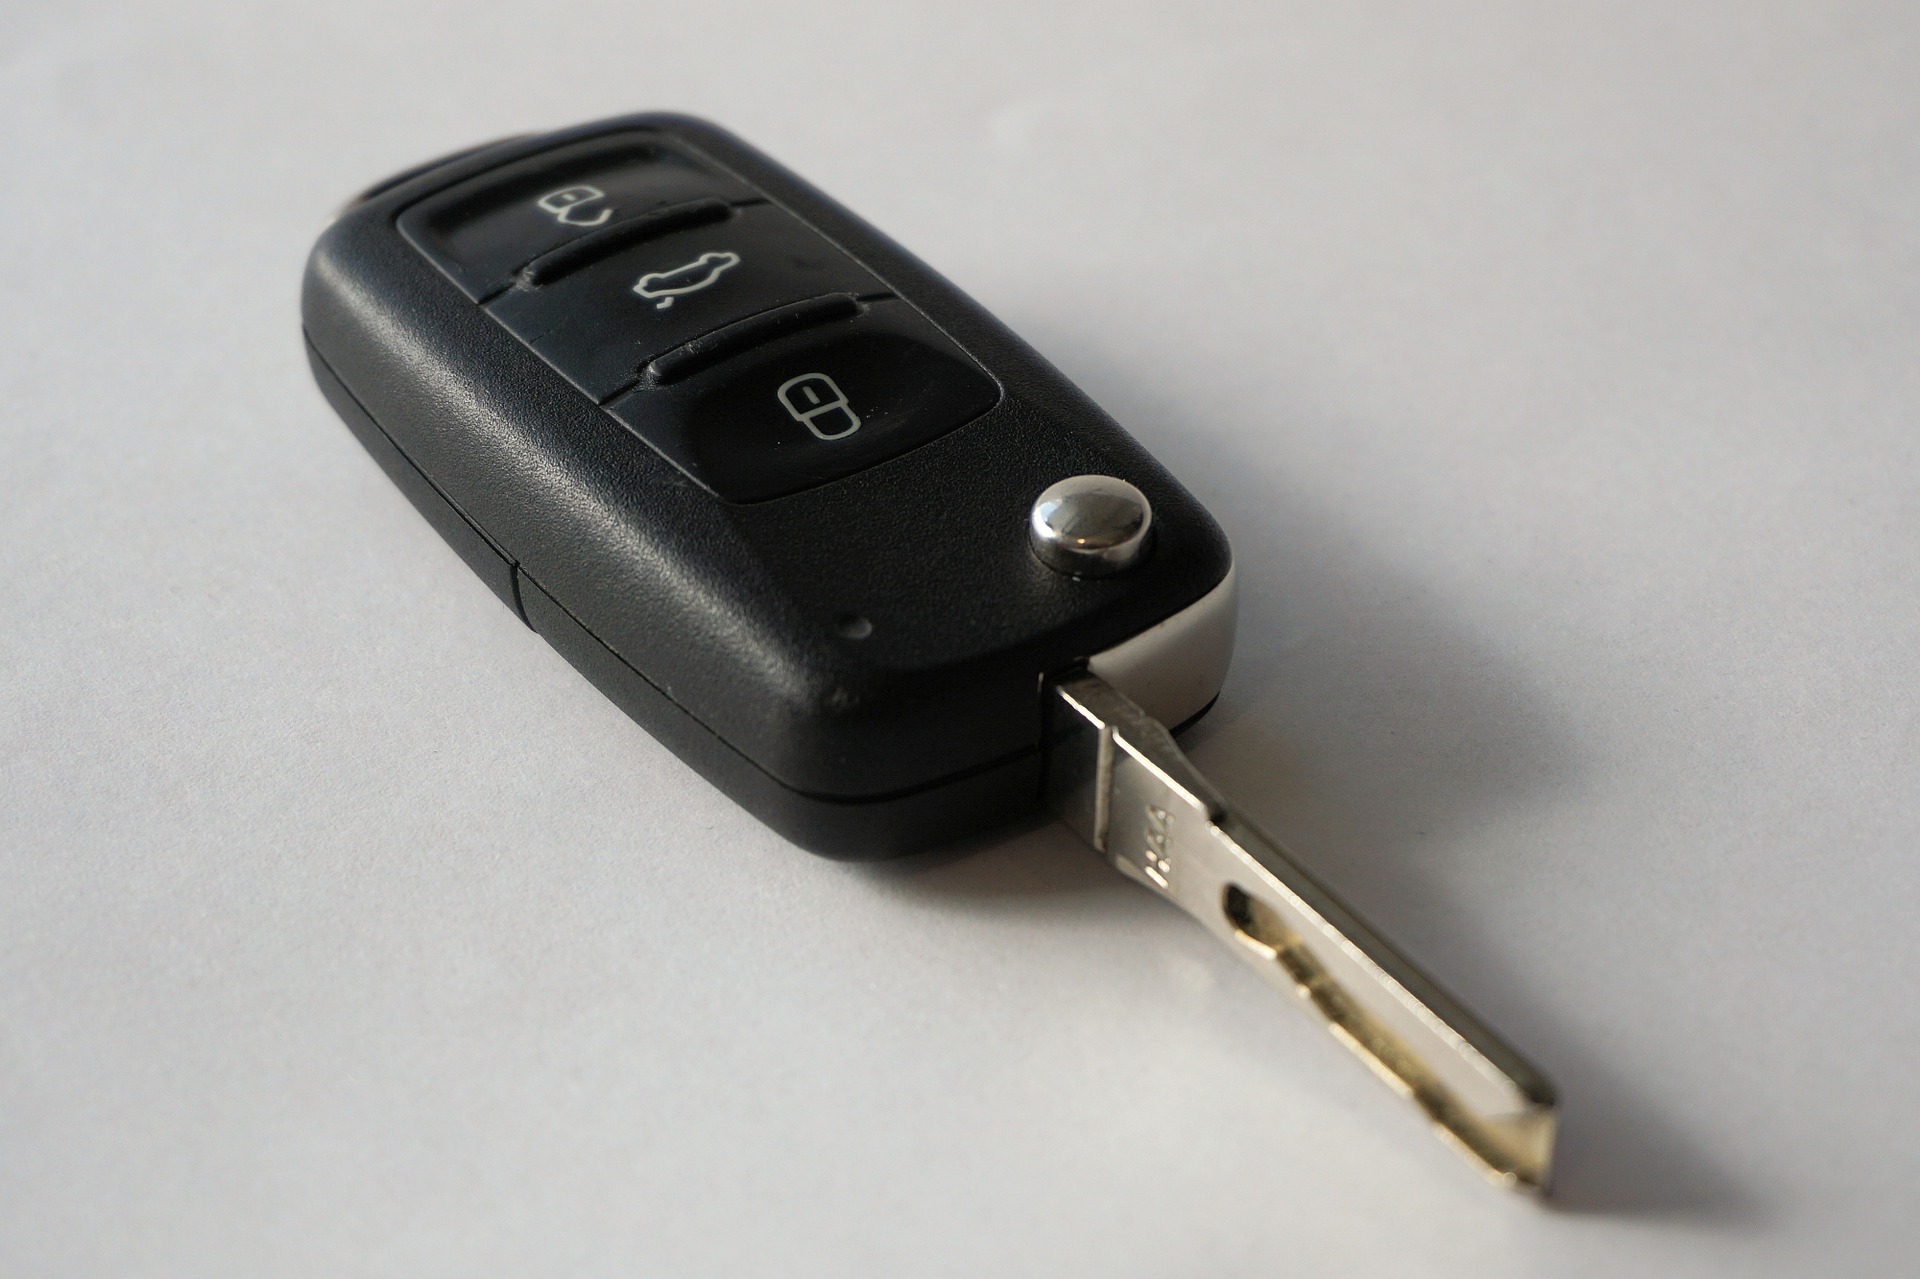 Honda Key Fob Battery Life and Replacement